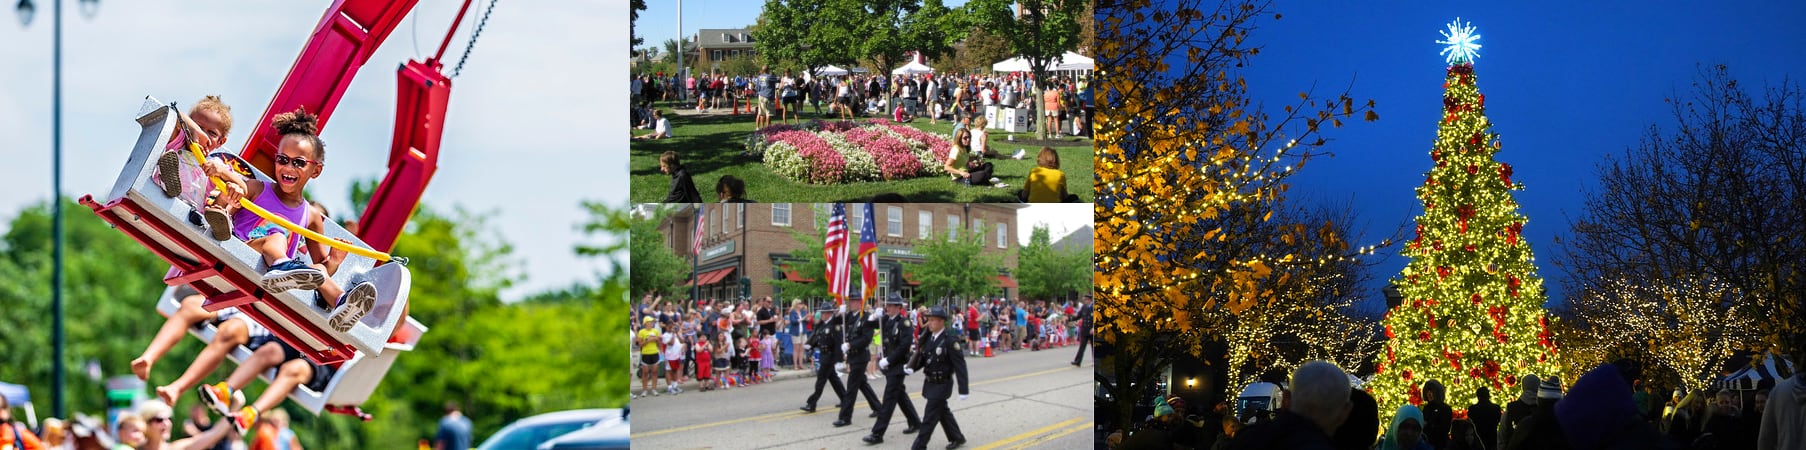 Annual Events in New Albany